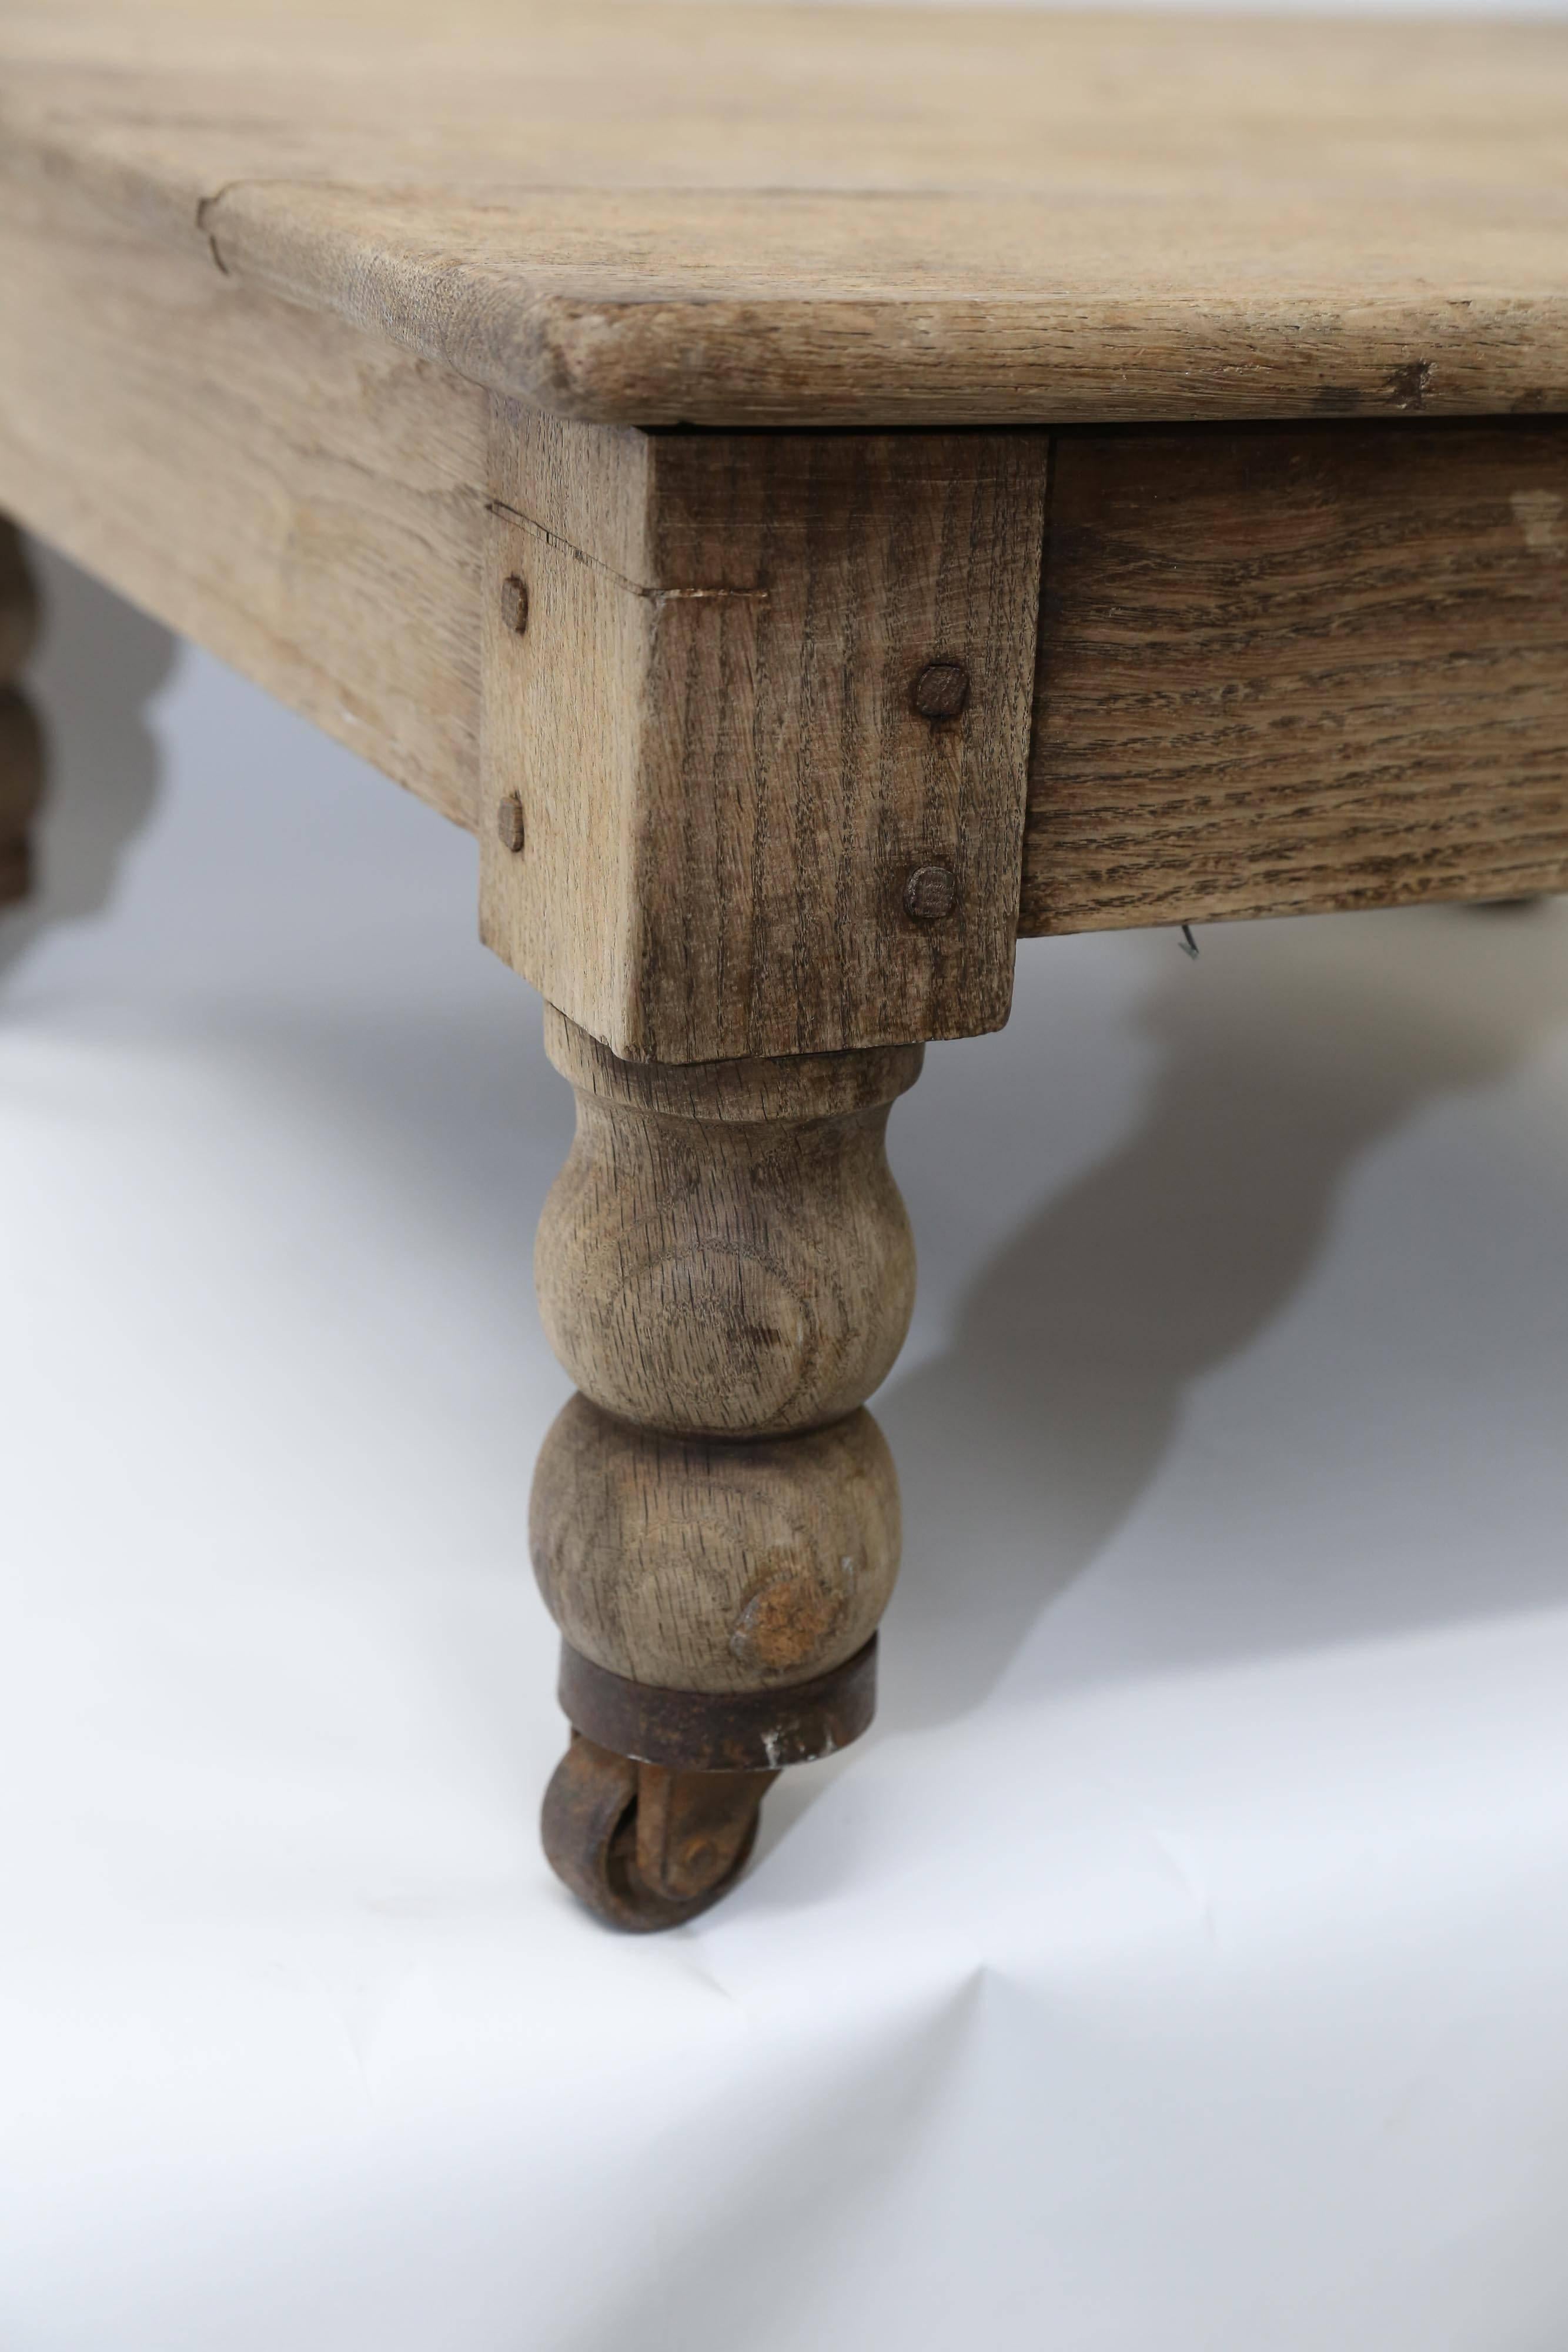 A small wood table with turned legs on metal casters found in France. Made by hand, the apron is attached with small square wooden pegs that make a delightful detail on the unfinished wood. A little table with a big personality!